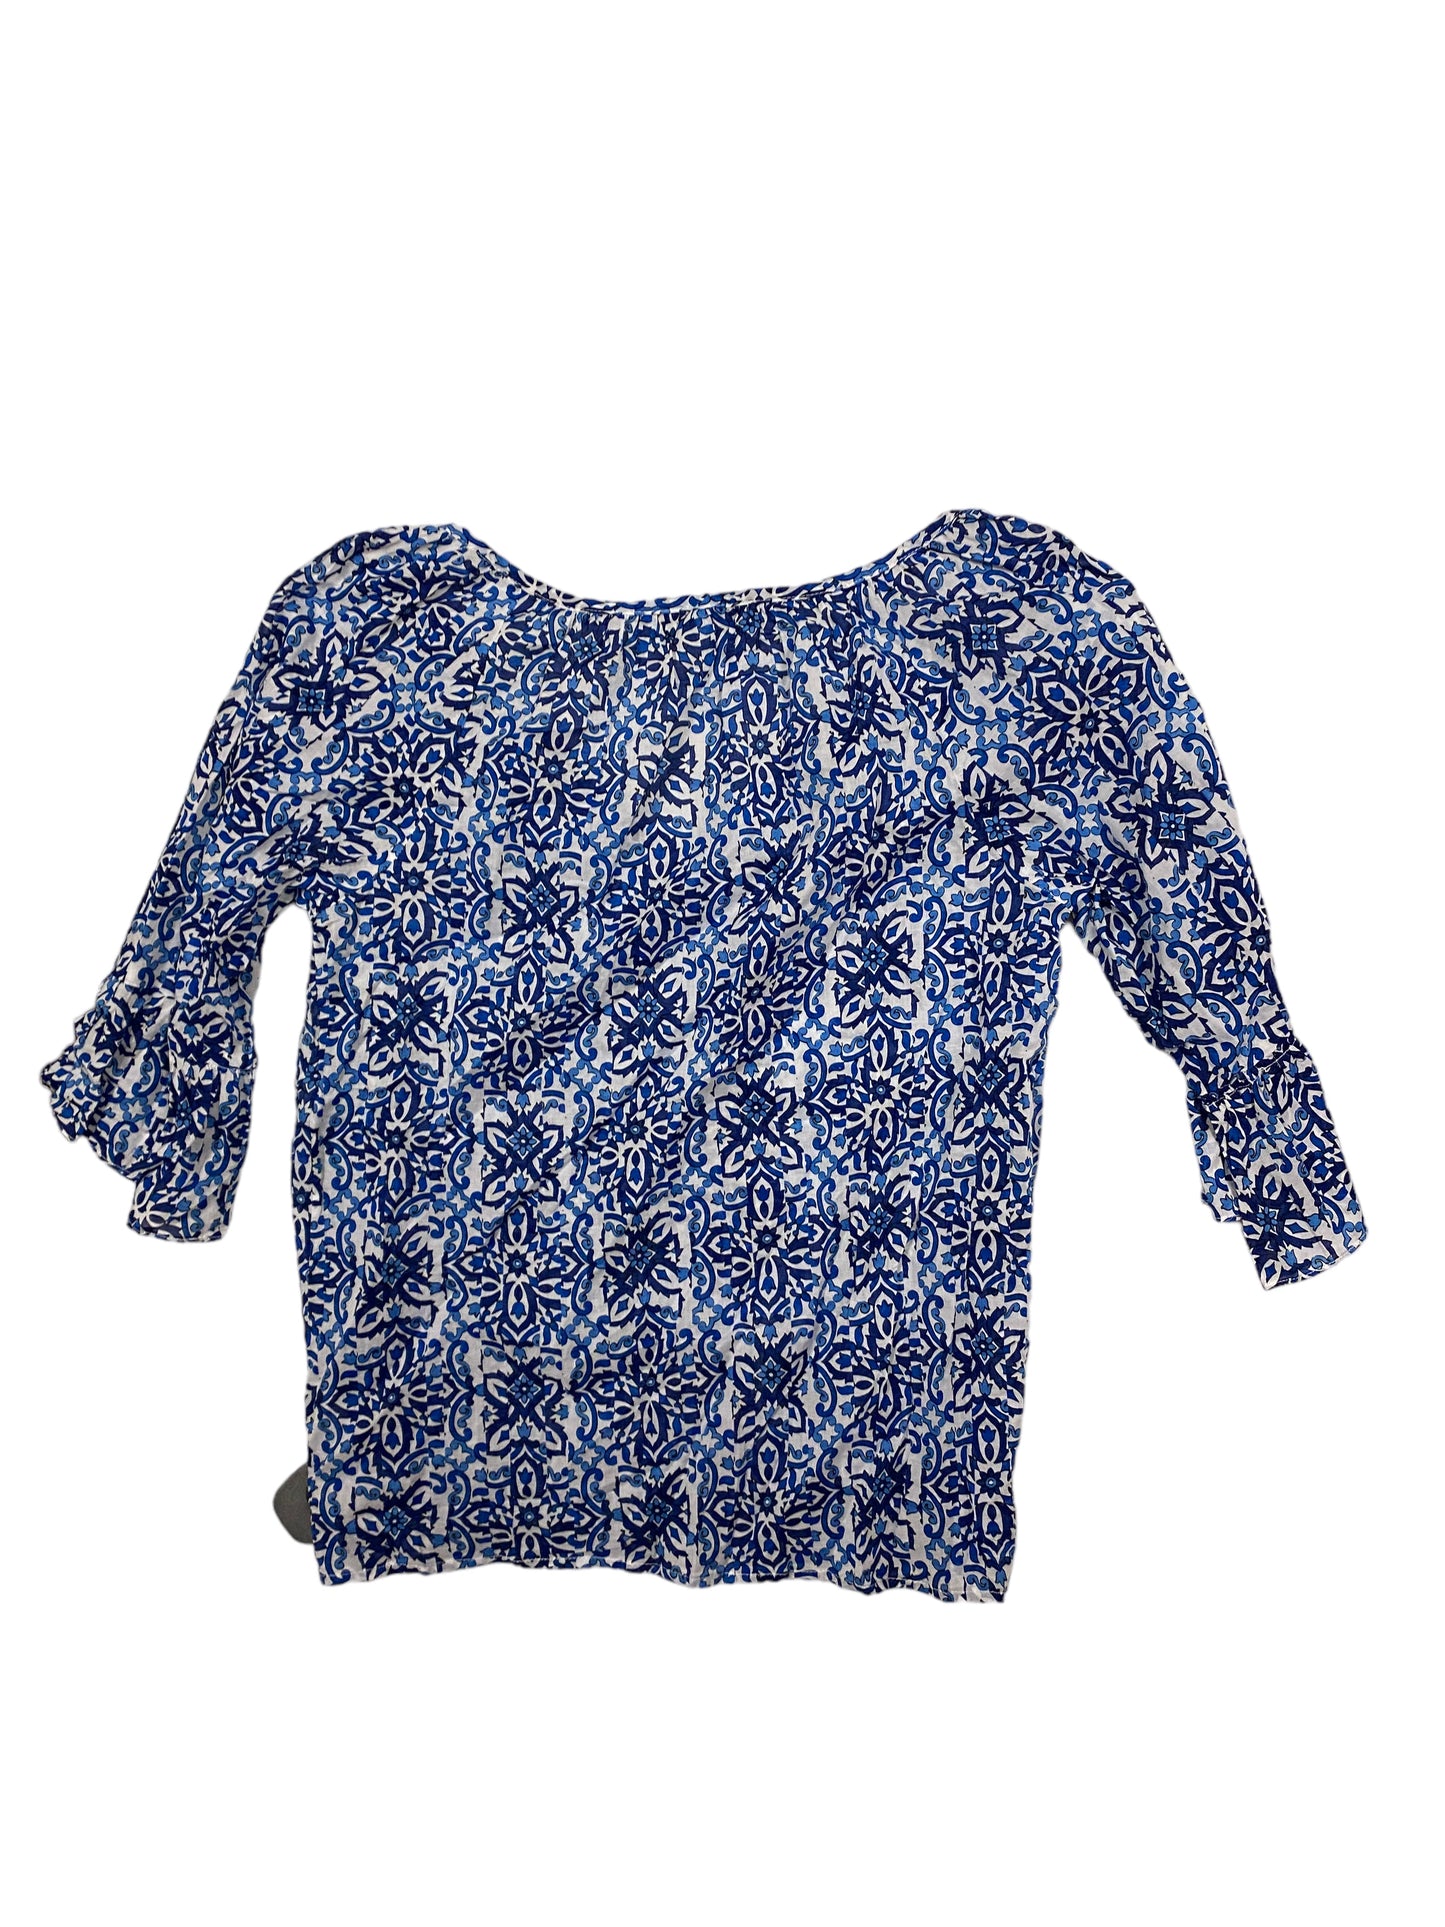 Blue & White Top Long Sleeve Designer Milly, Size Xs